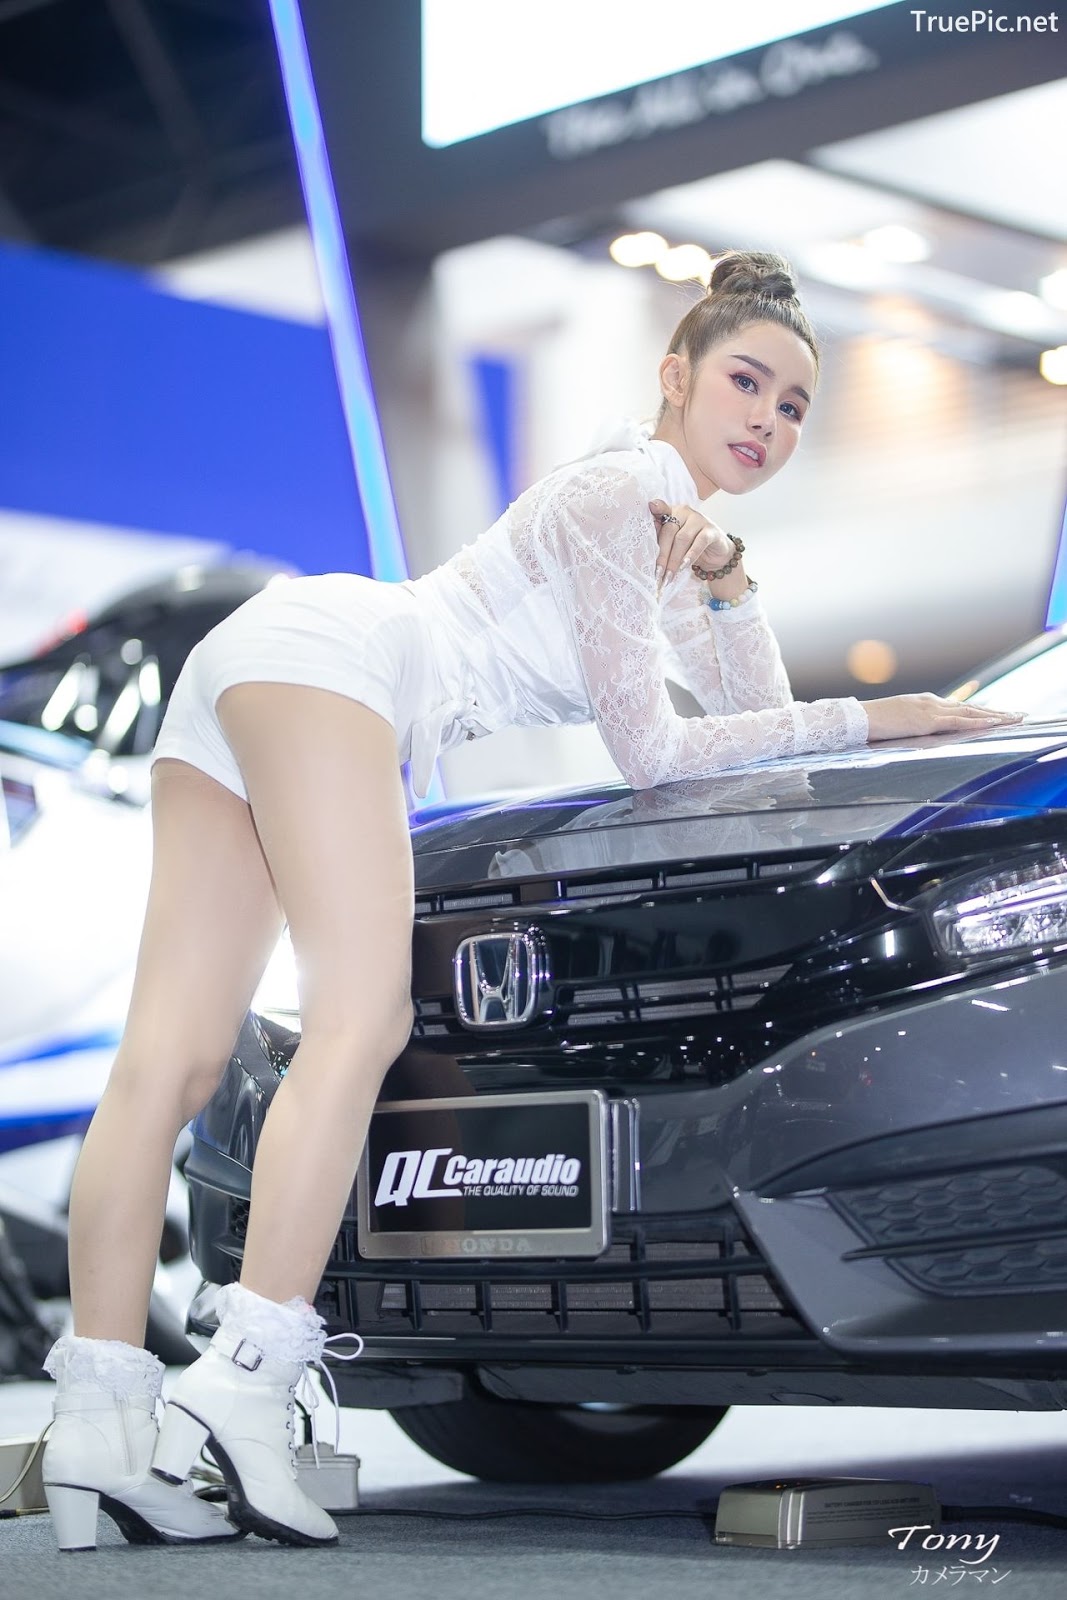 Image-Thailand-Hot-Model-Thai-Racing-Girl-At-Motor-Expo-2019-TruePic.net- Picture-55